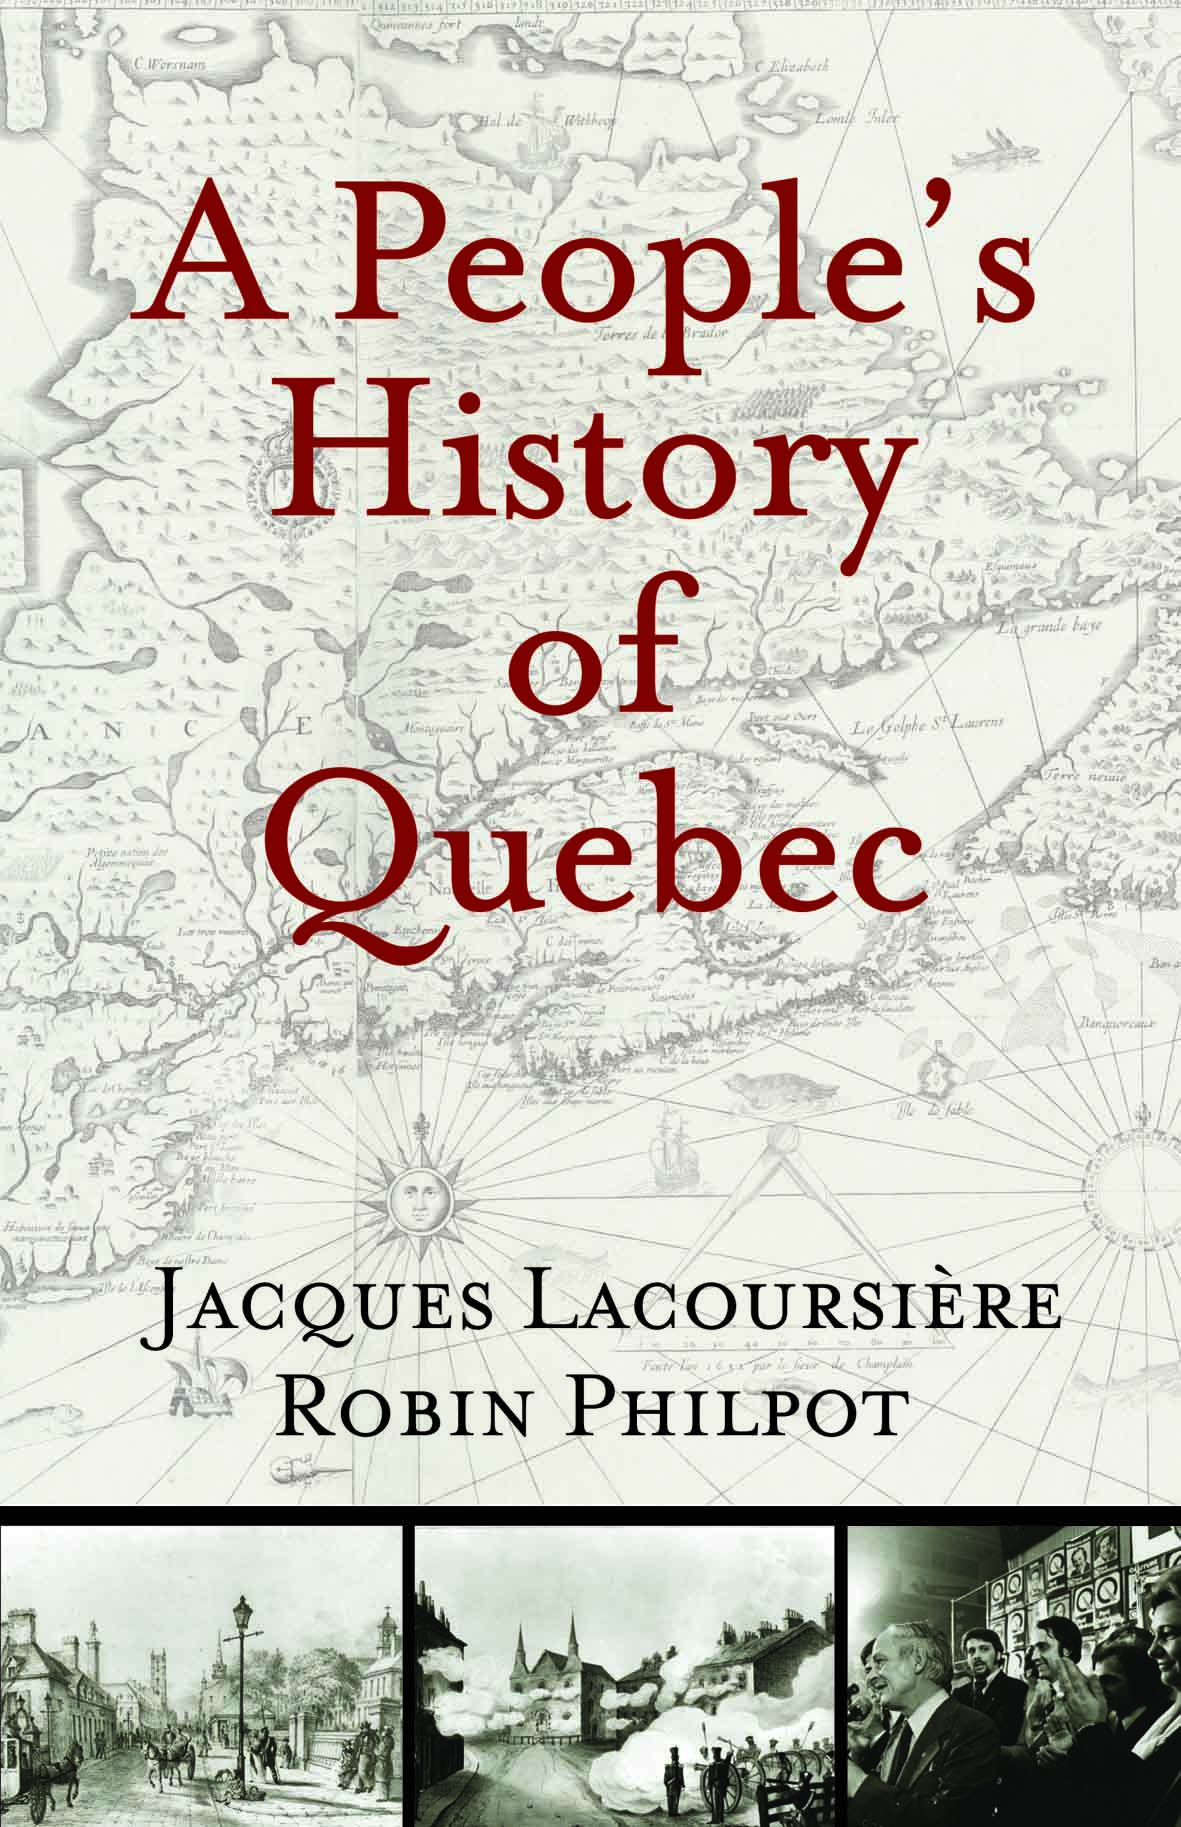 The cover of A People's History of Quebec 